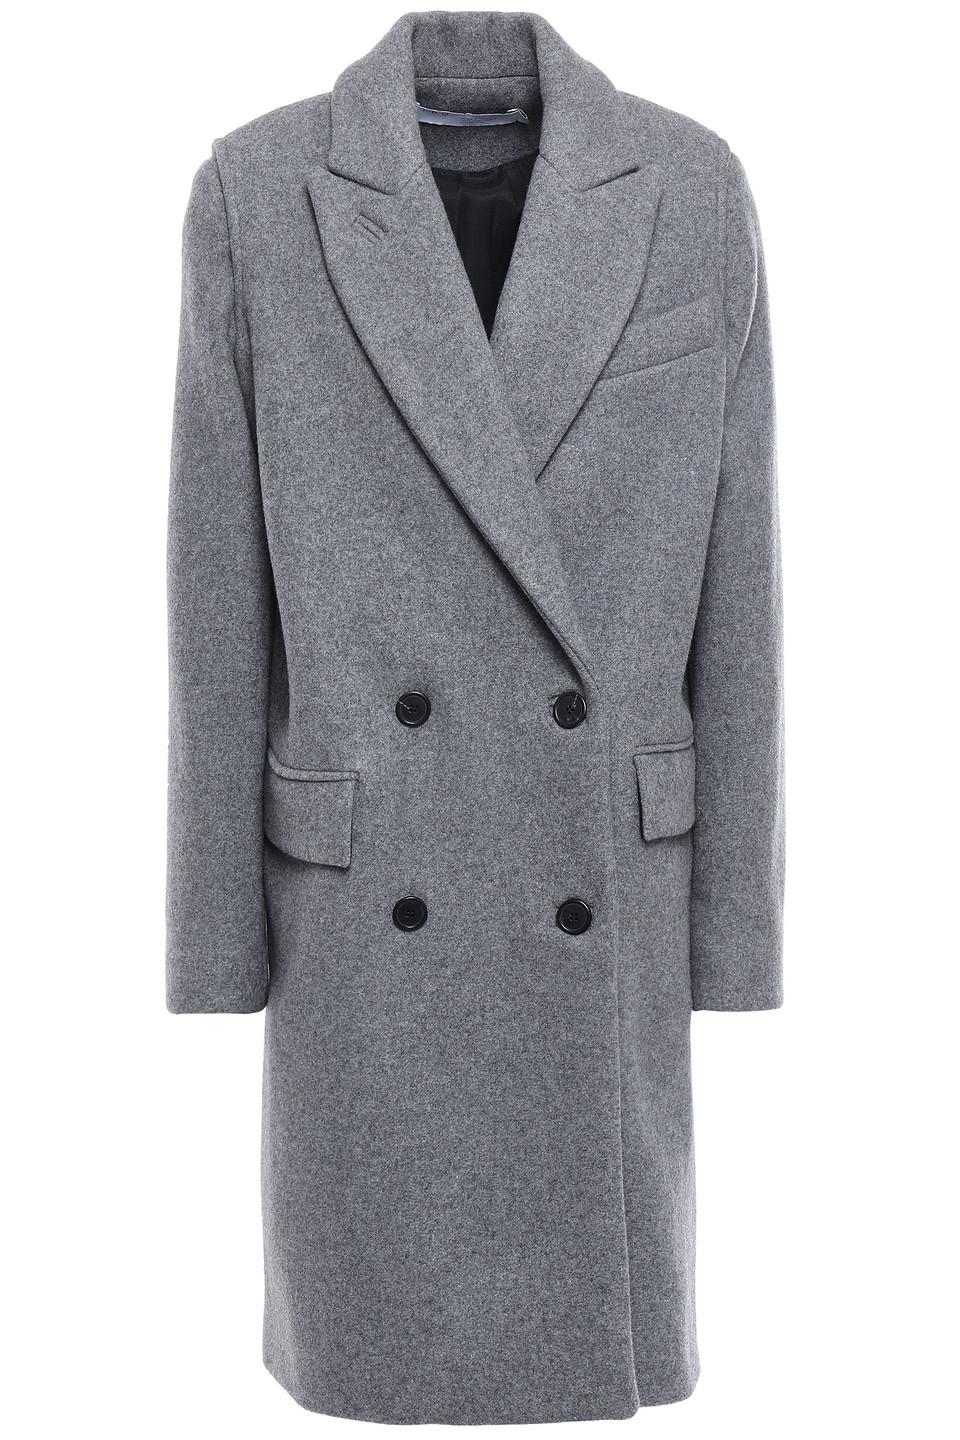 IRO Fine Double-breasted Wool And Cashmere-blend Felt Coat Gray - Lyst